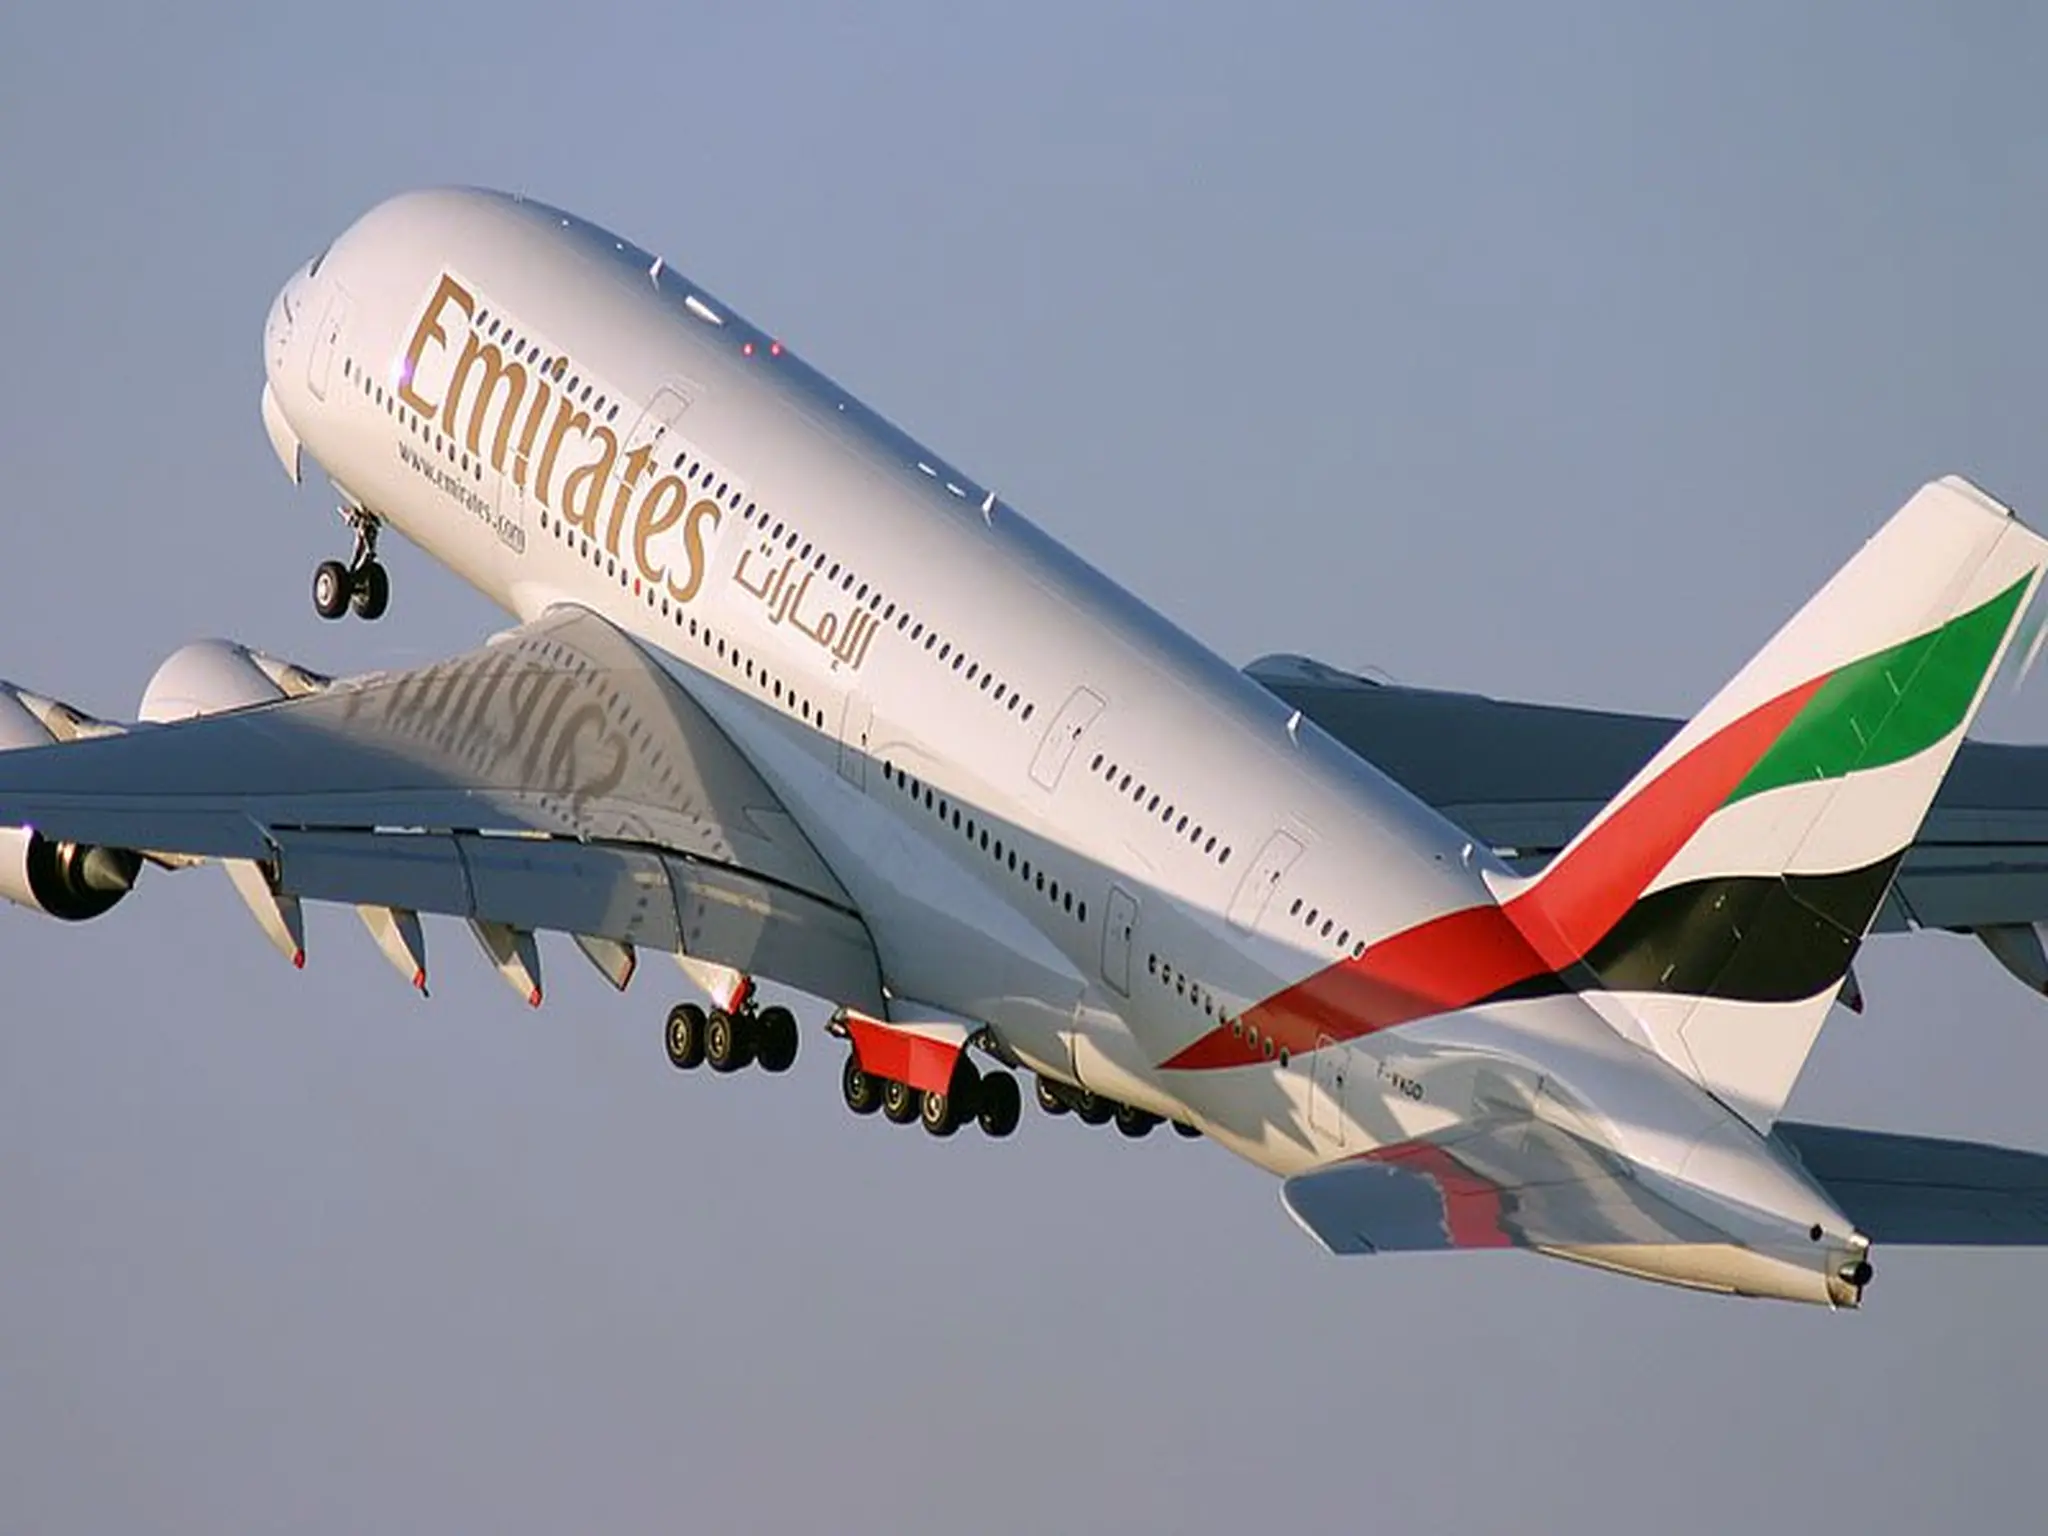 Emirates Airlines announces a very special offer for its customers in Dubai and Sharjah